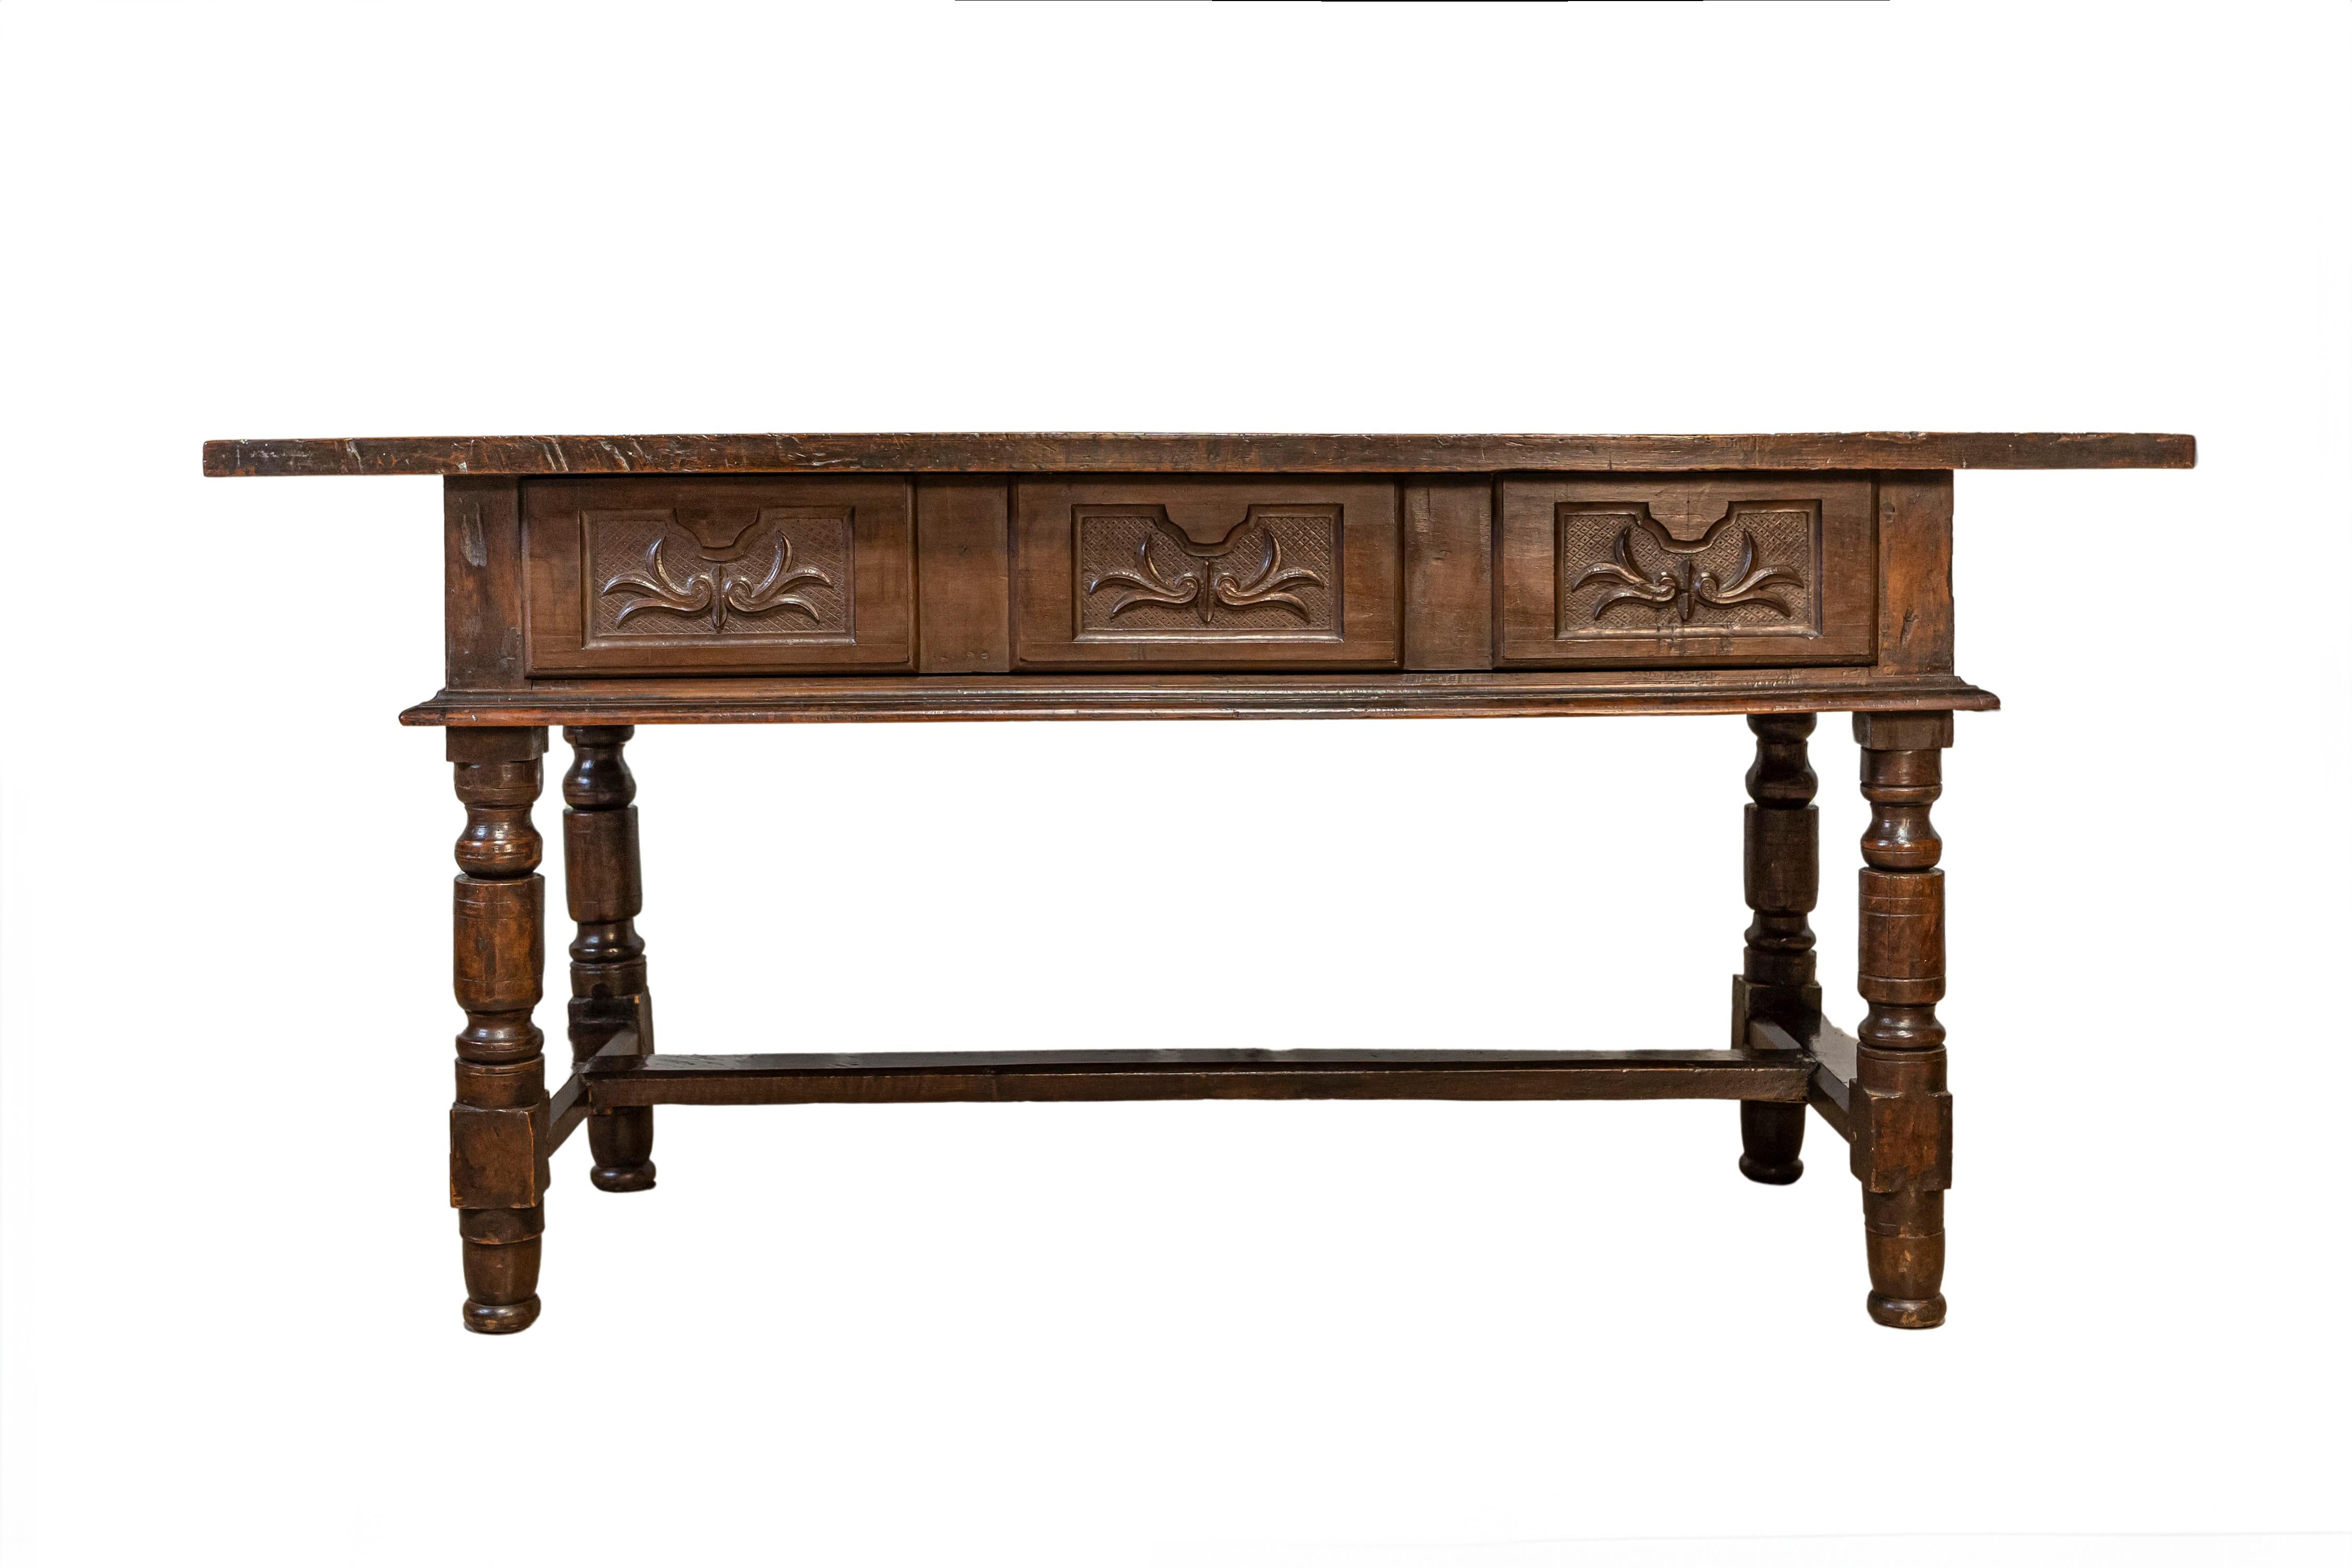 Spanish Baroque 17th Century Walnut Table with Carved Drawers and Turned Legs For Sale 3